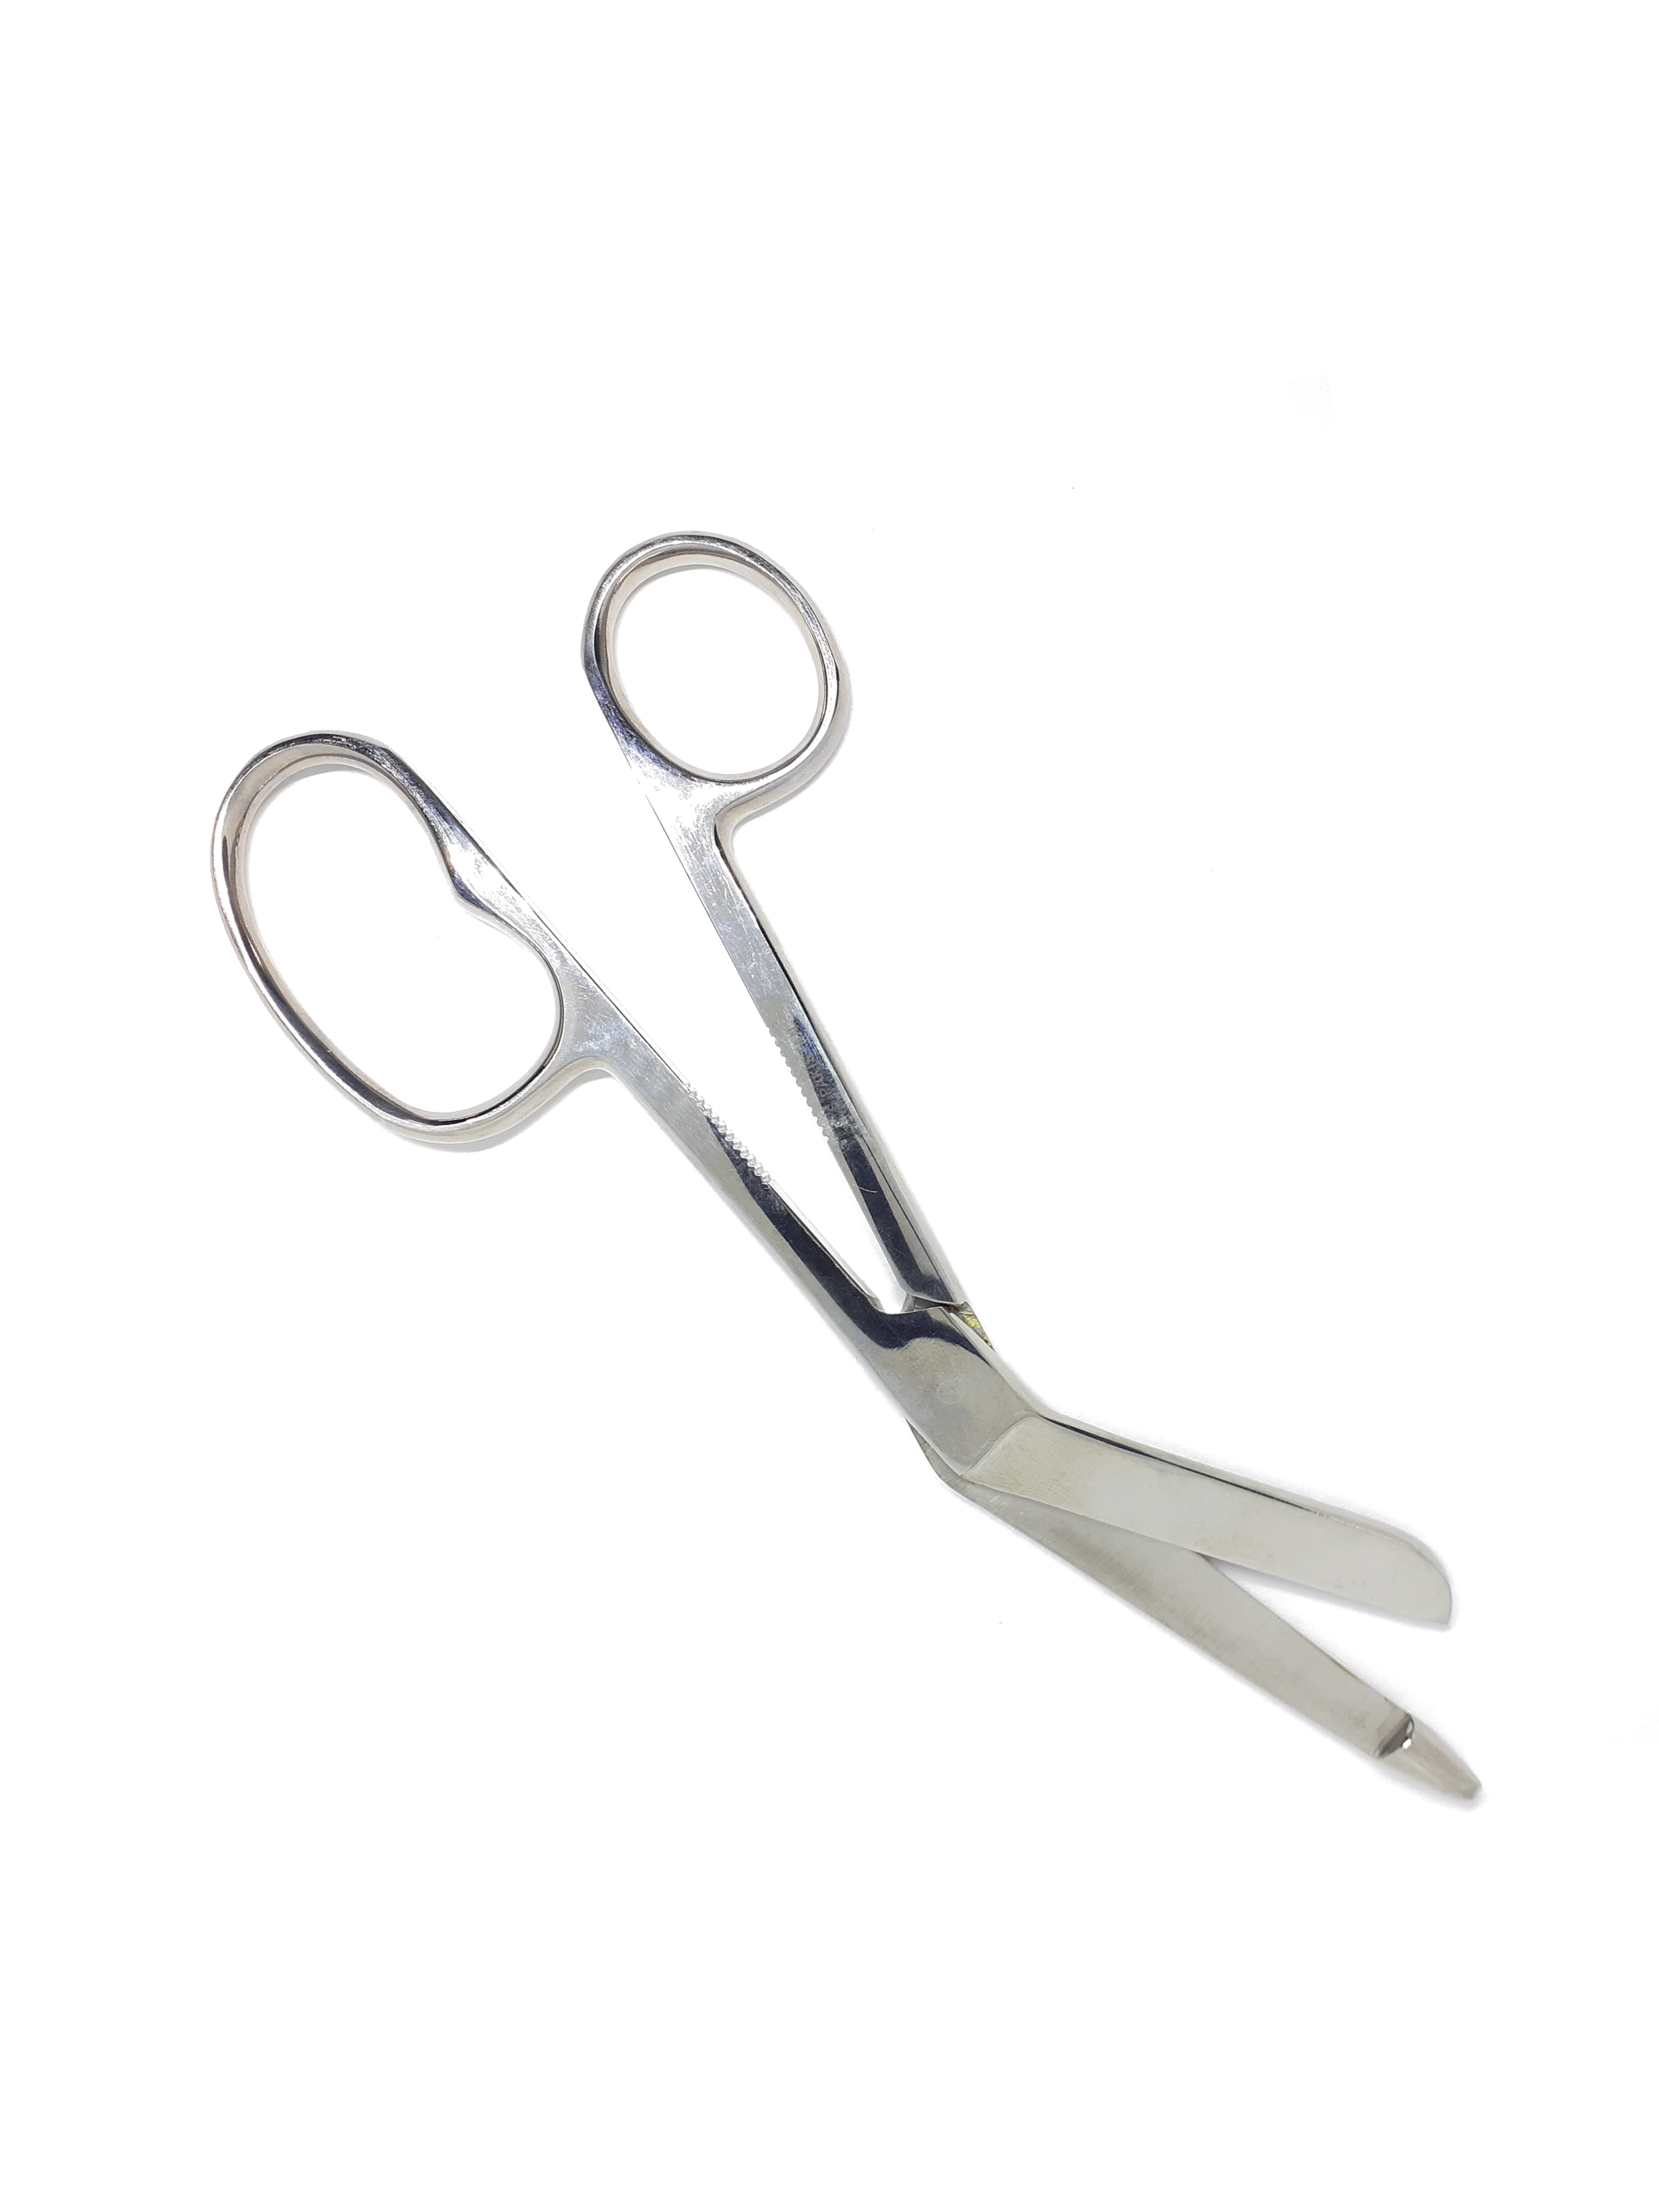 https://gripsors.net/wp-content/uploads/2020/10/Gripsors-7.25-Inch-Stainless-Steel-Scissors.png